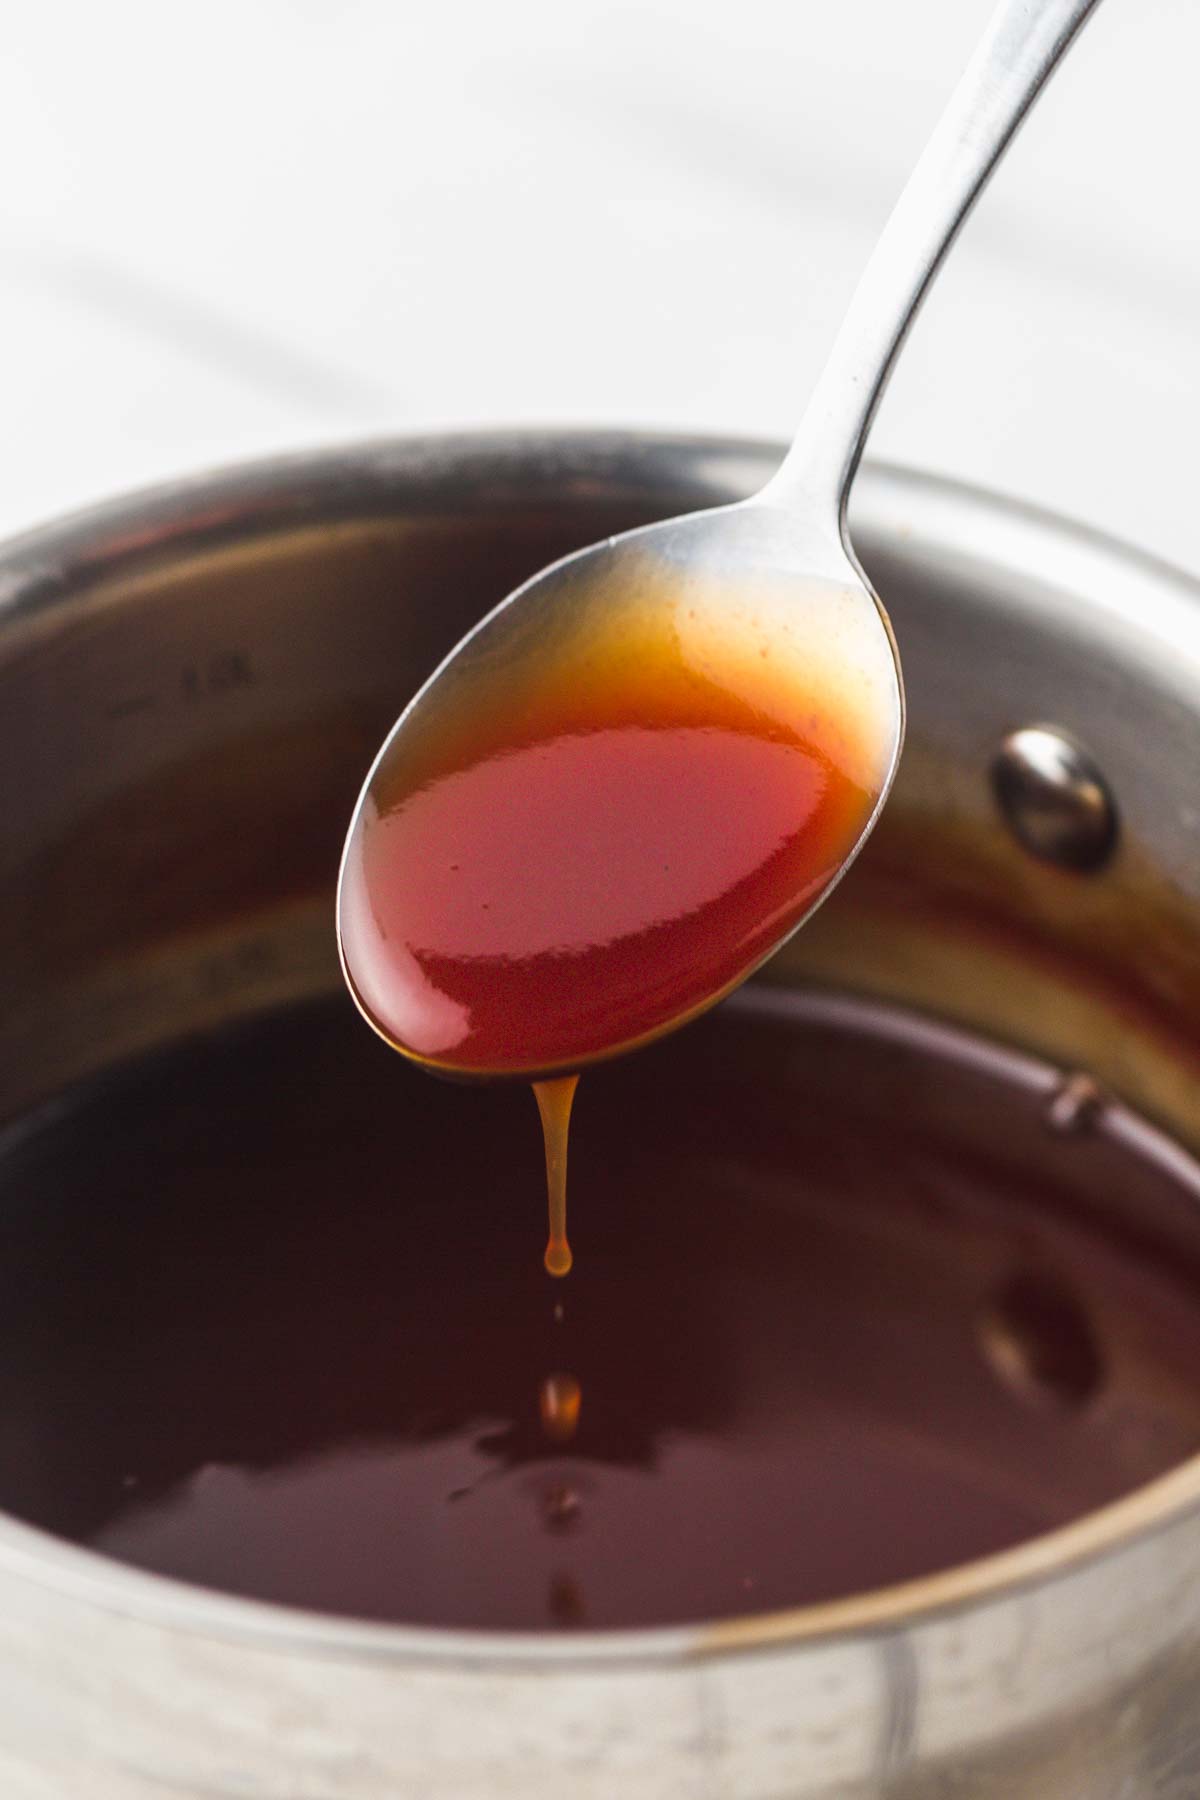 A spoon with Sweet and Sour Sauce over a saucepan